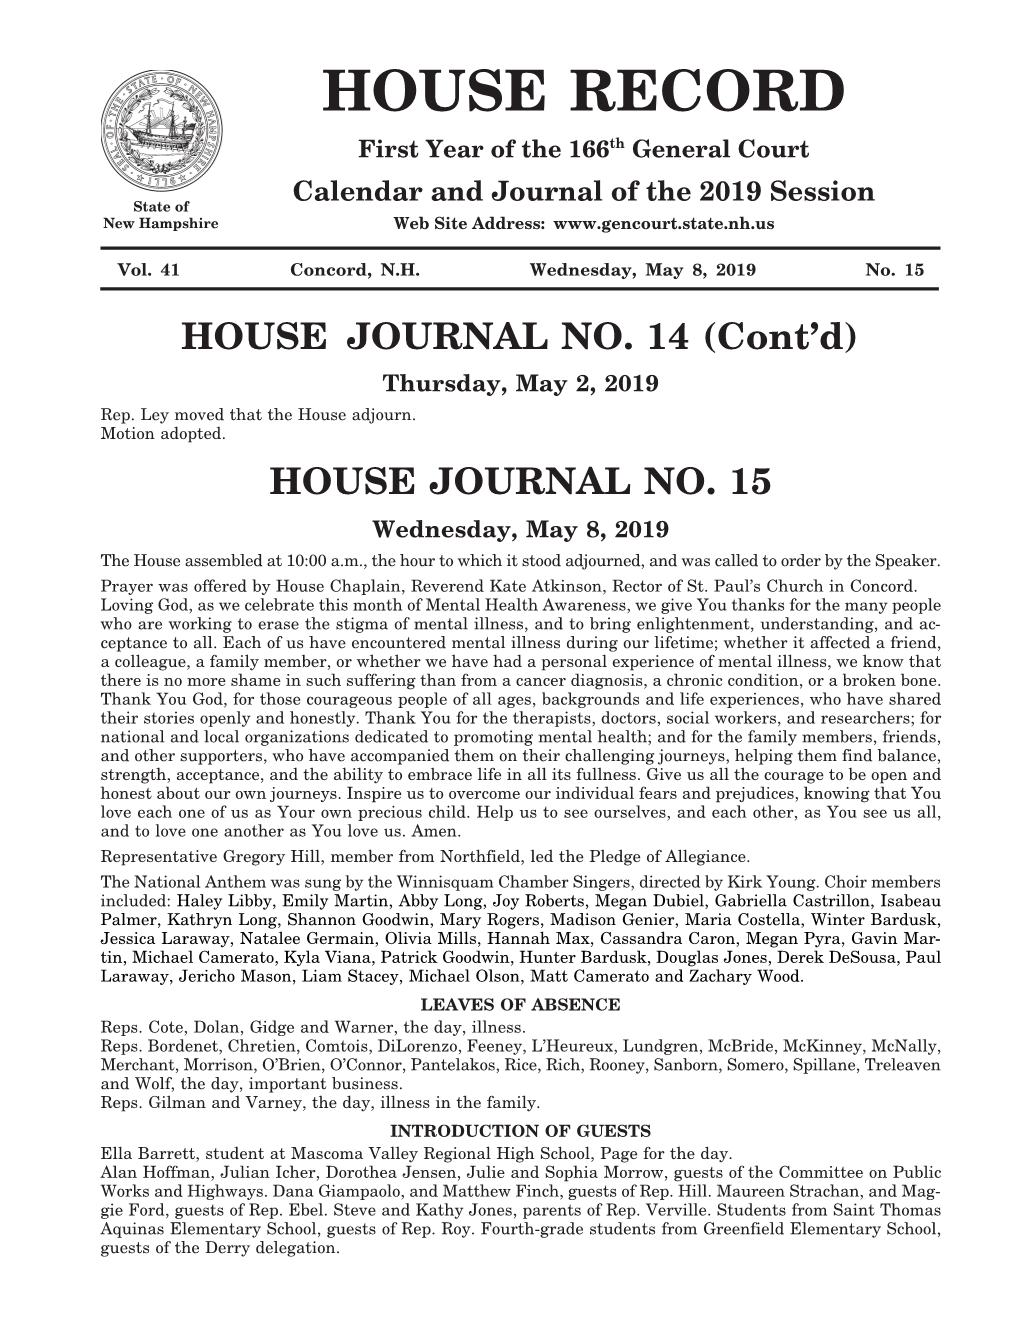 HOUSE JOURNAL NO. 14 (Cont’D) Thursday, May 2, 2019 Rep